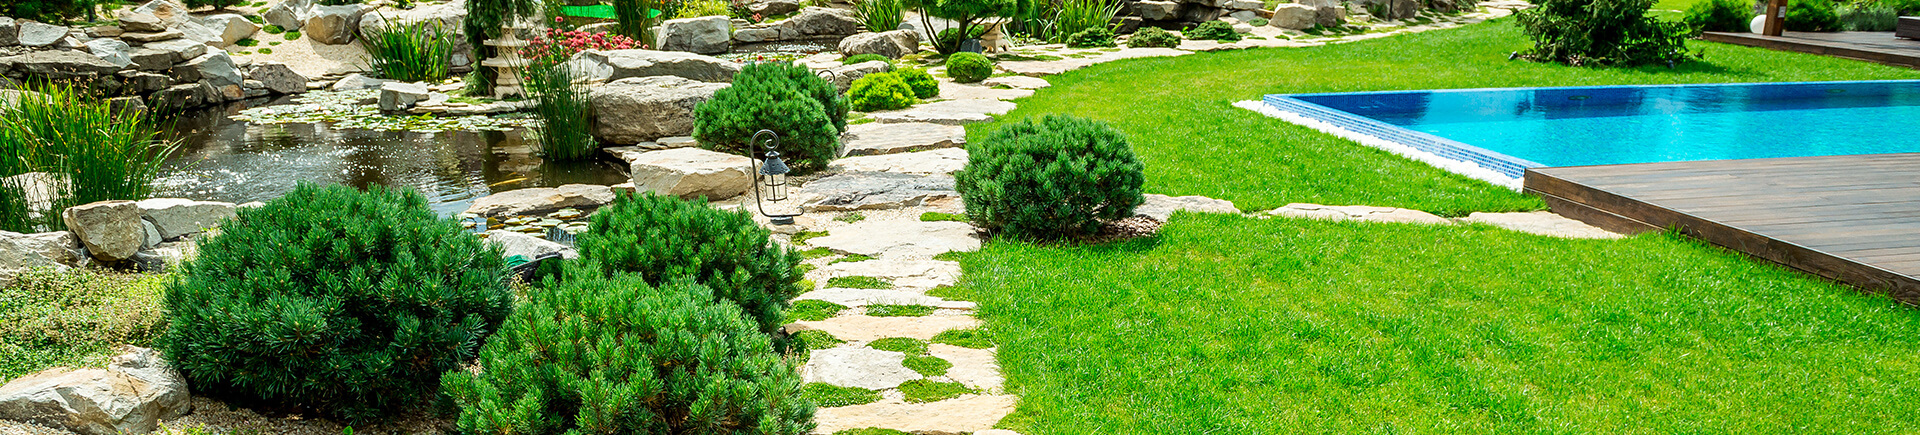 Lawn Service and Landscaping for Apartment Complex Decatur, GA